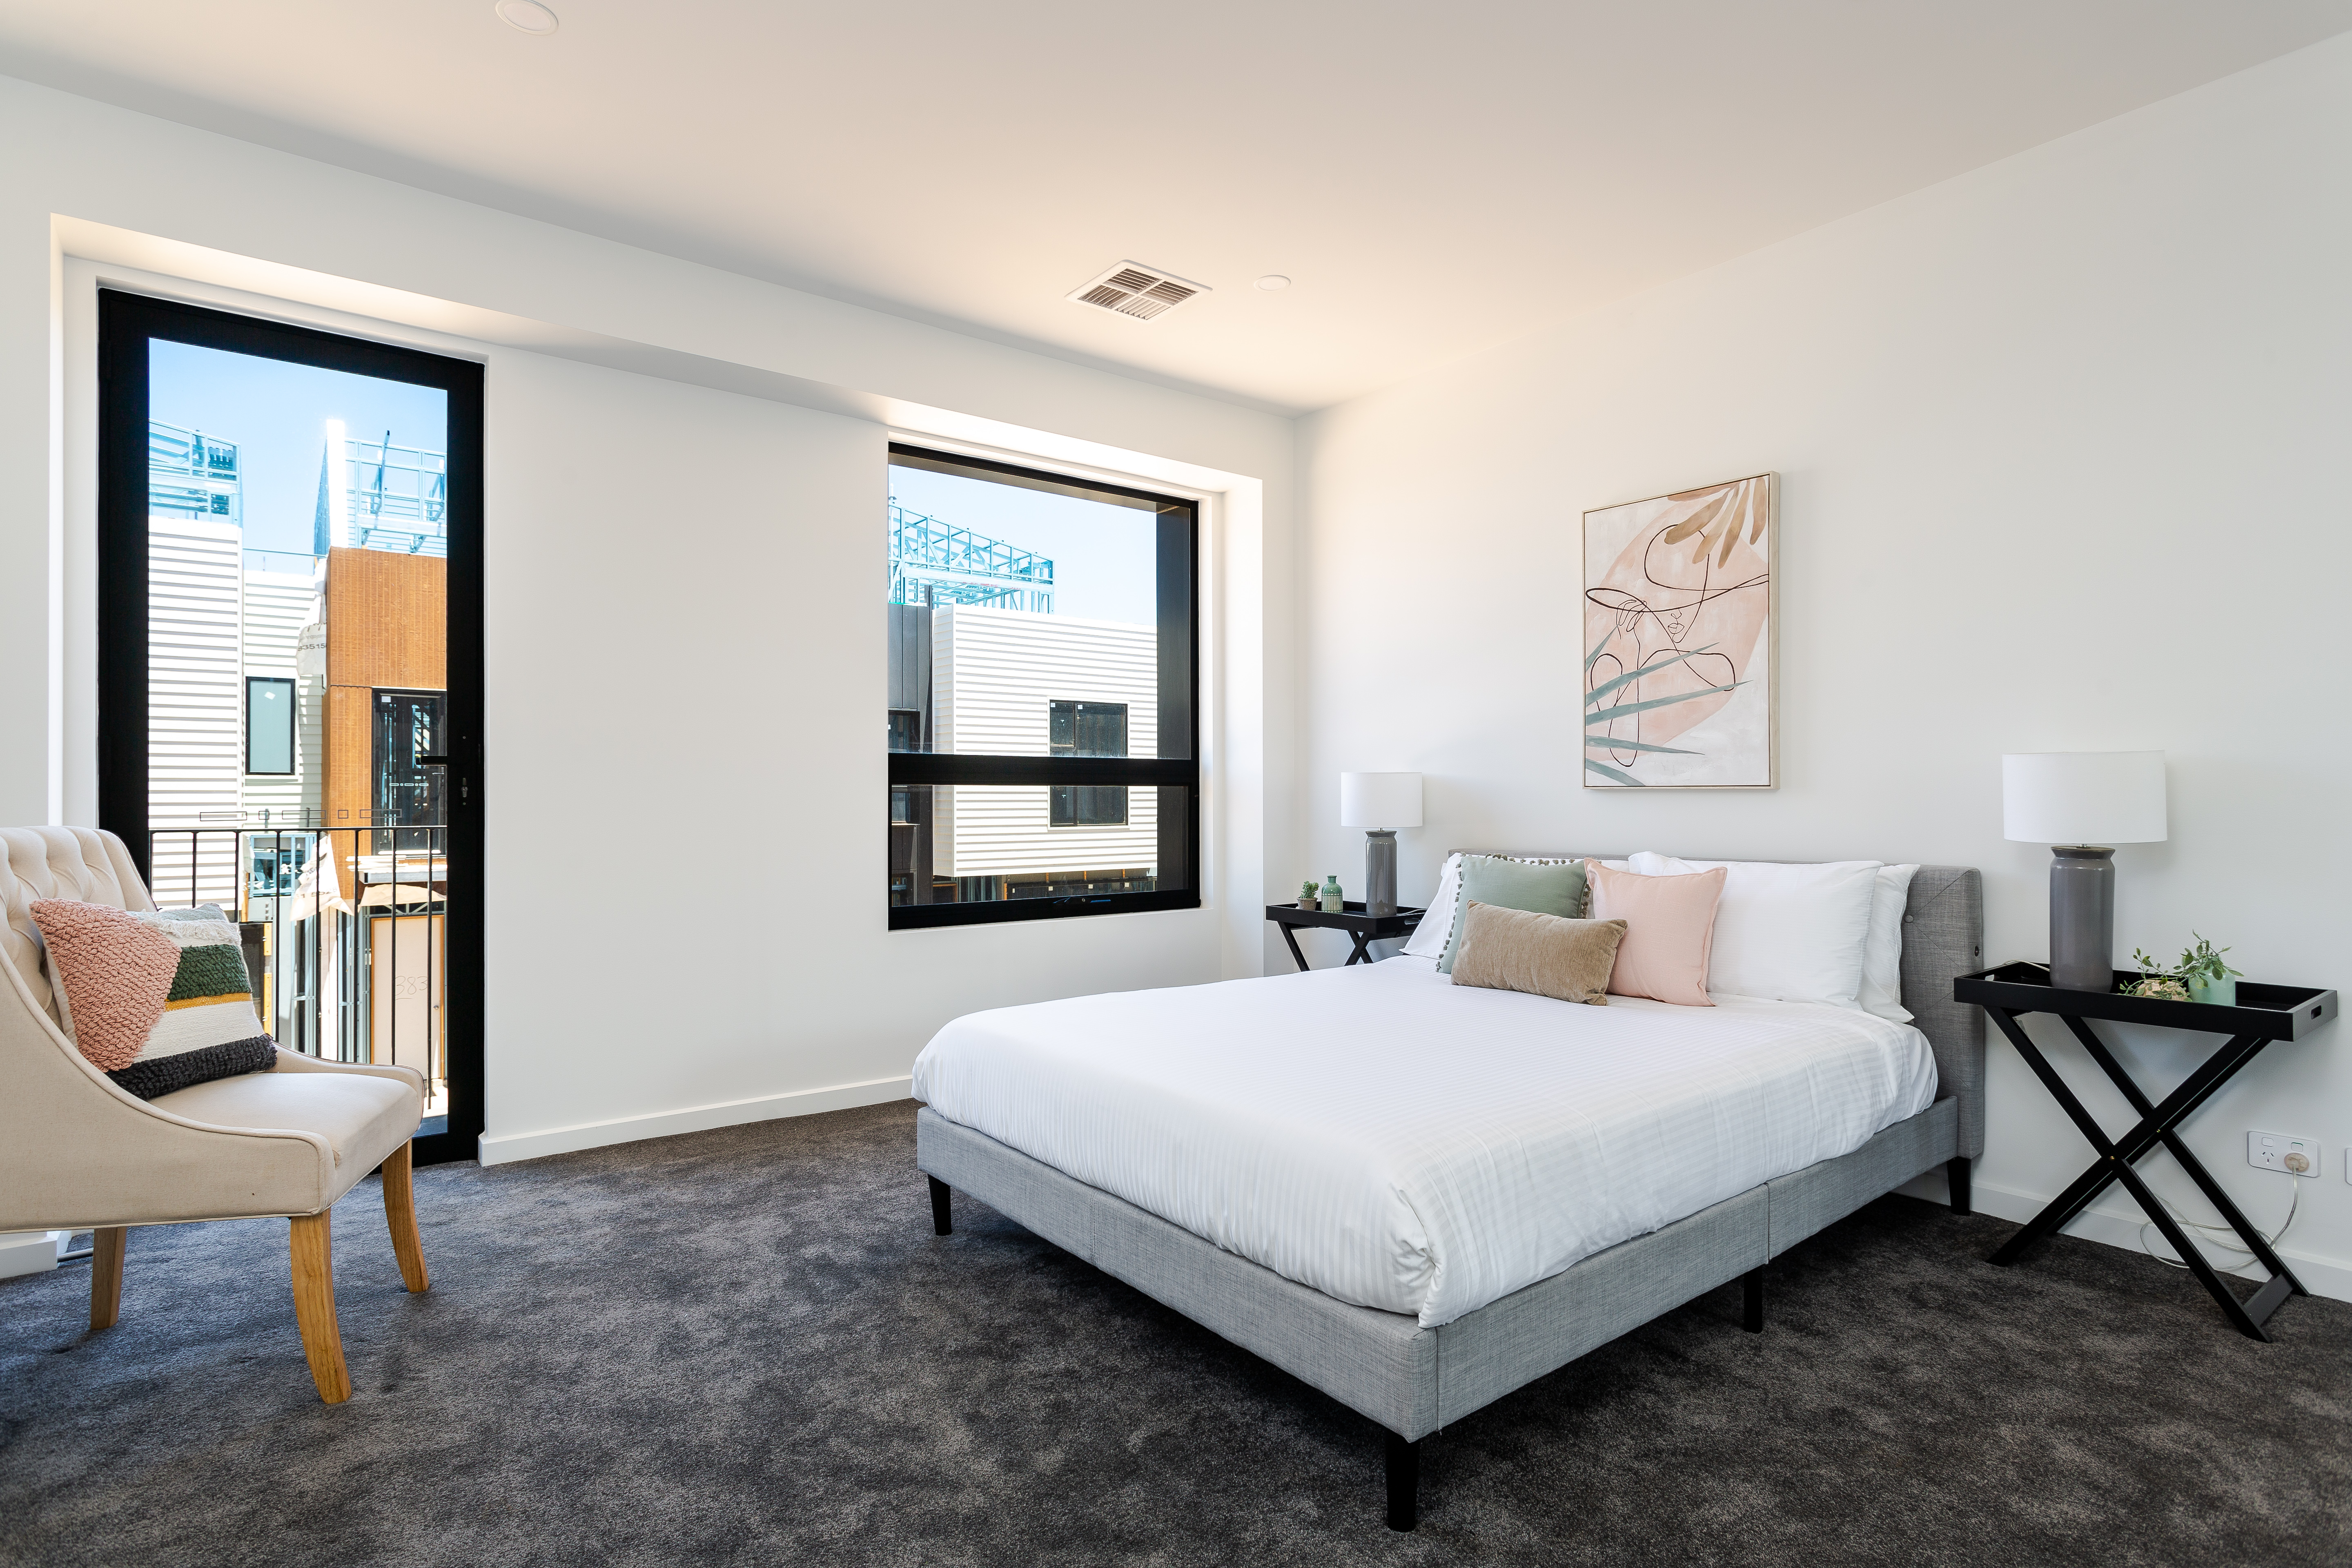 Bedroom - Two Bedroom Apartment - Urban Rest - Albany Lane Apartments - Adelaide